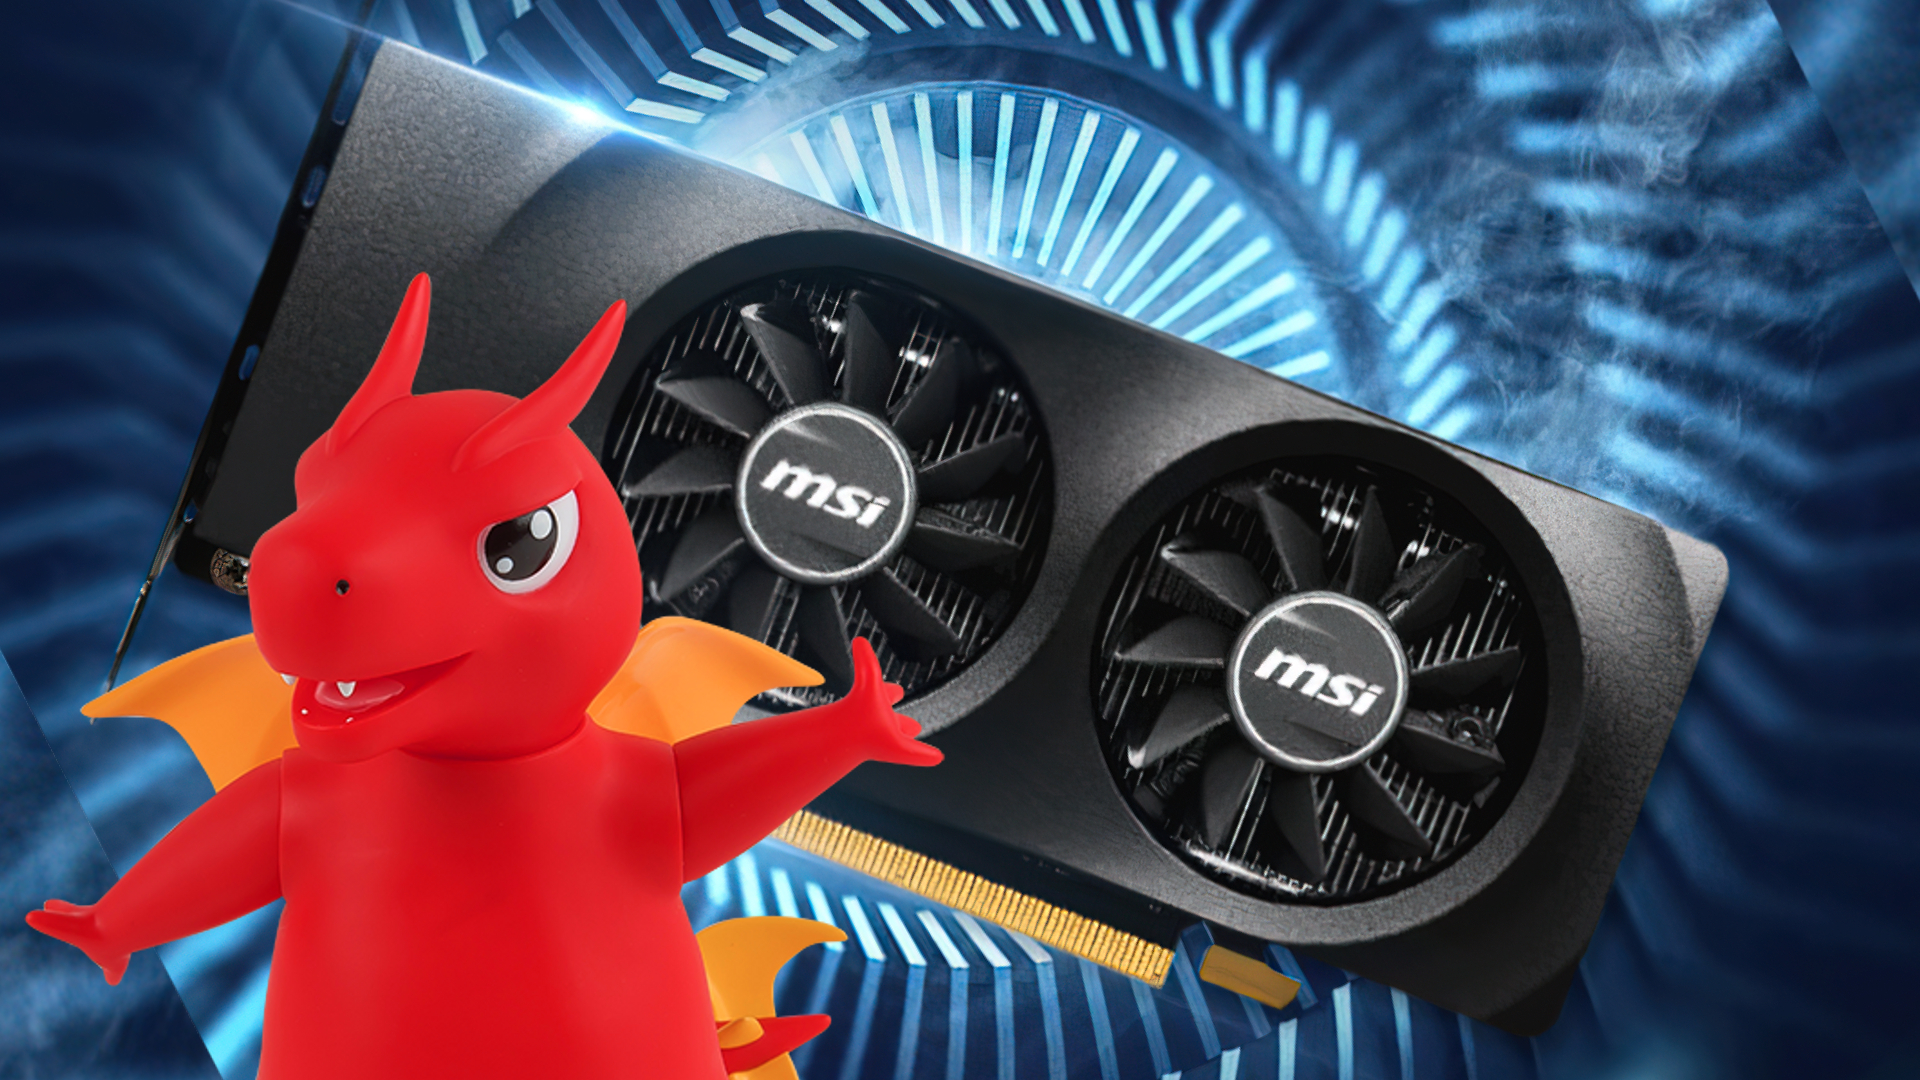 MSI Intel Arc A380 GPU on the cards for pre-built gaming PCs